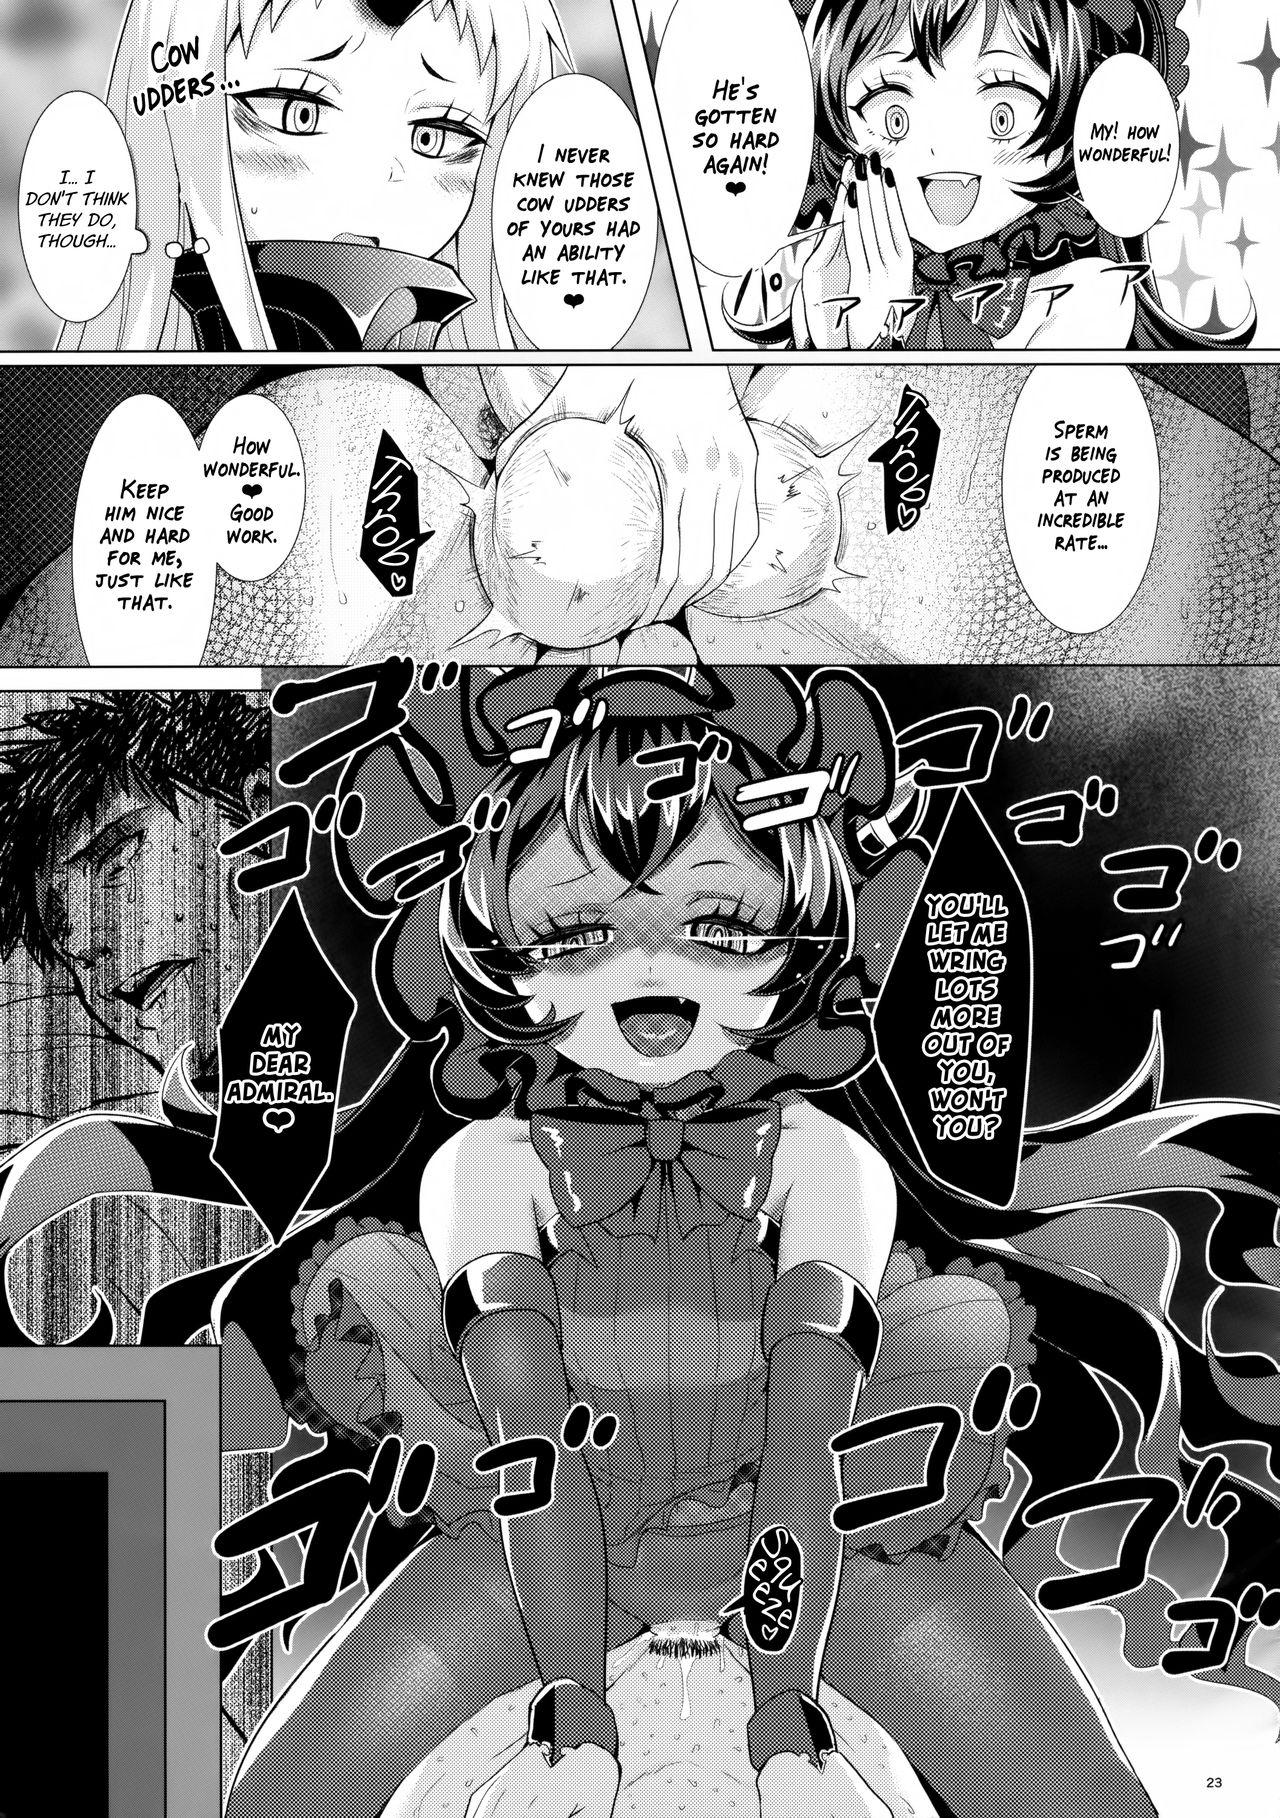 Off-kaigo Sokupako Shita Musume ga Shinkaiseikan datta Jian | That Time I Fucked a Girl Right After an Offline Meetup and She Turned Out to Be an Abyssal Ship 22